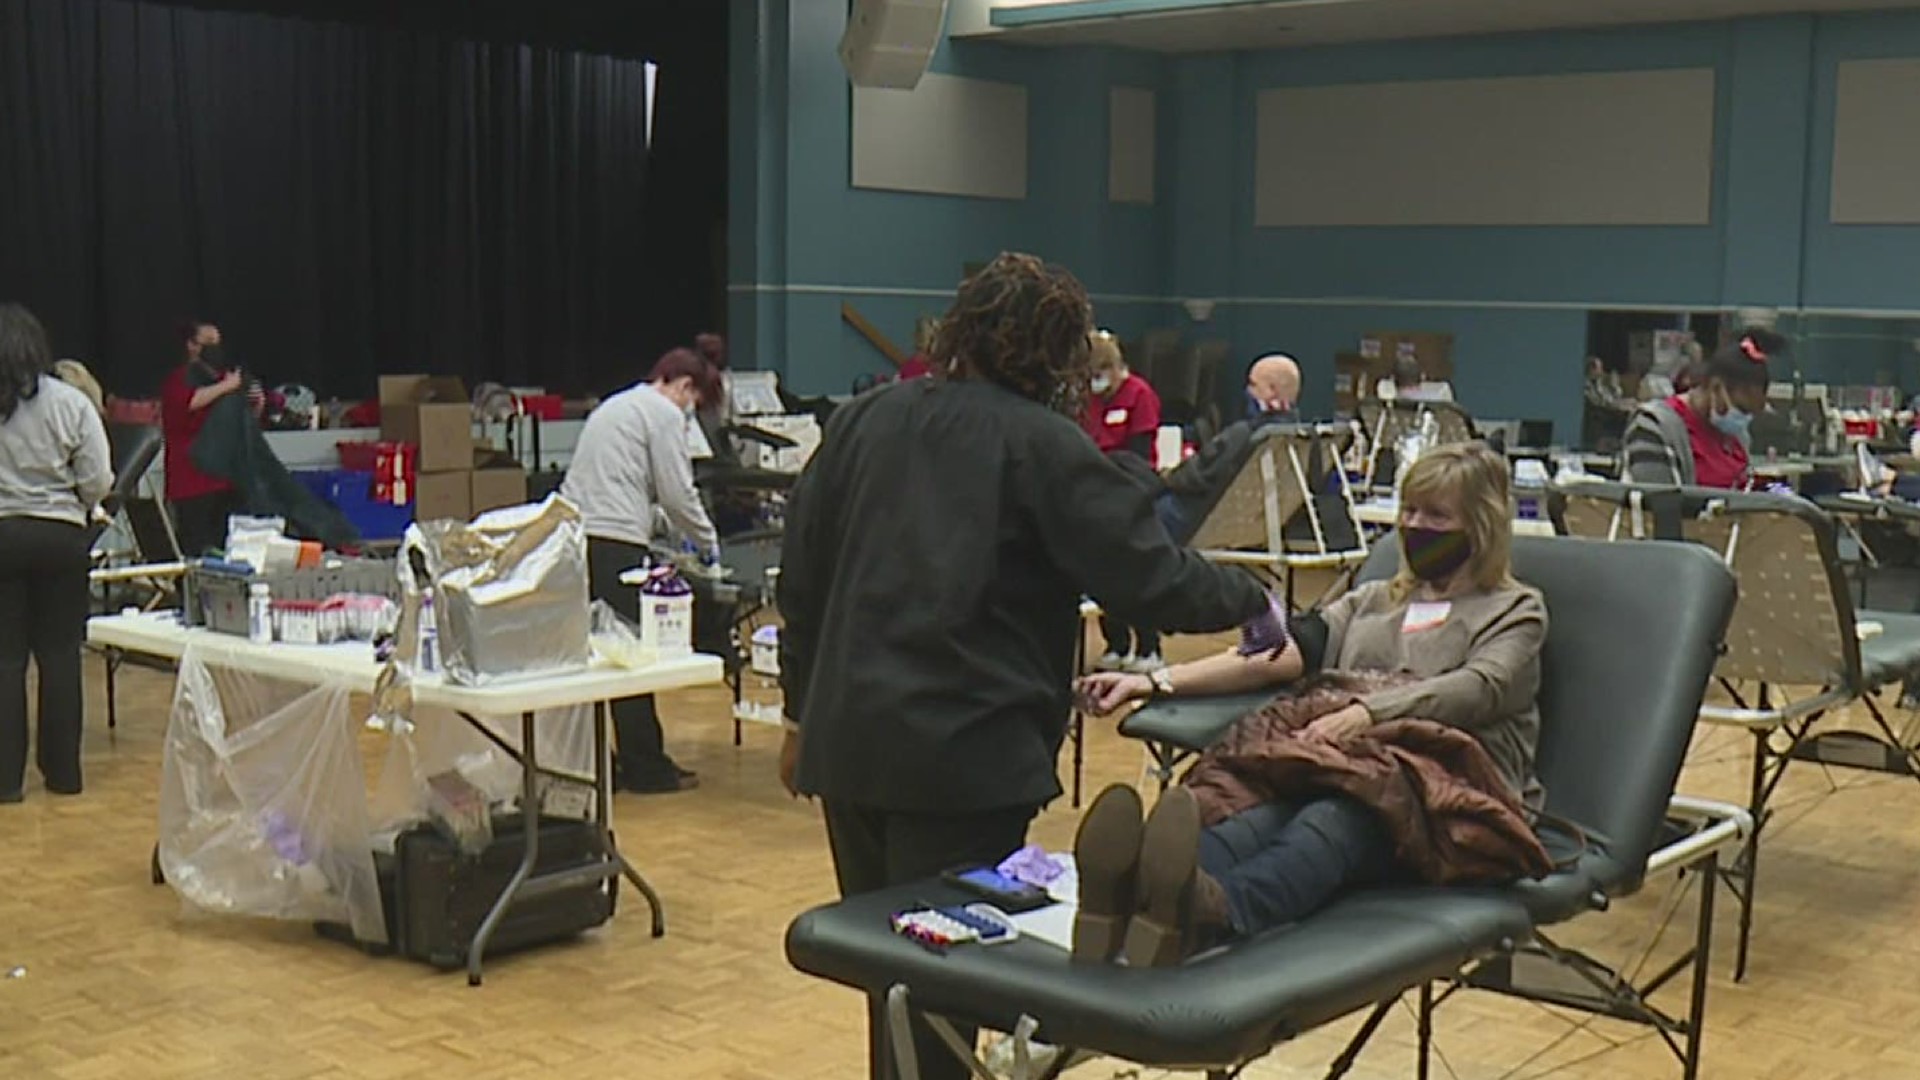 The American Red Cross says they haven't seen a blood shortage of this magnitude in over a decade.